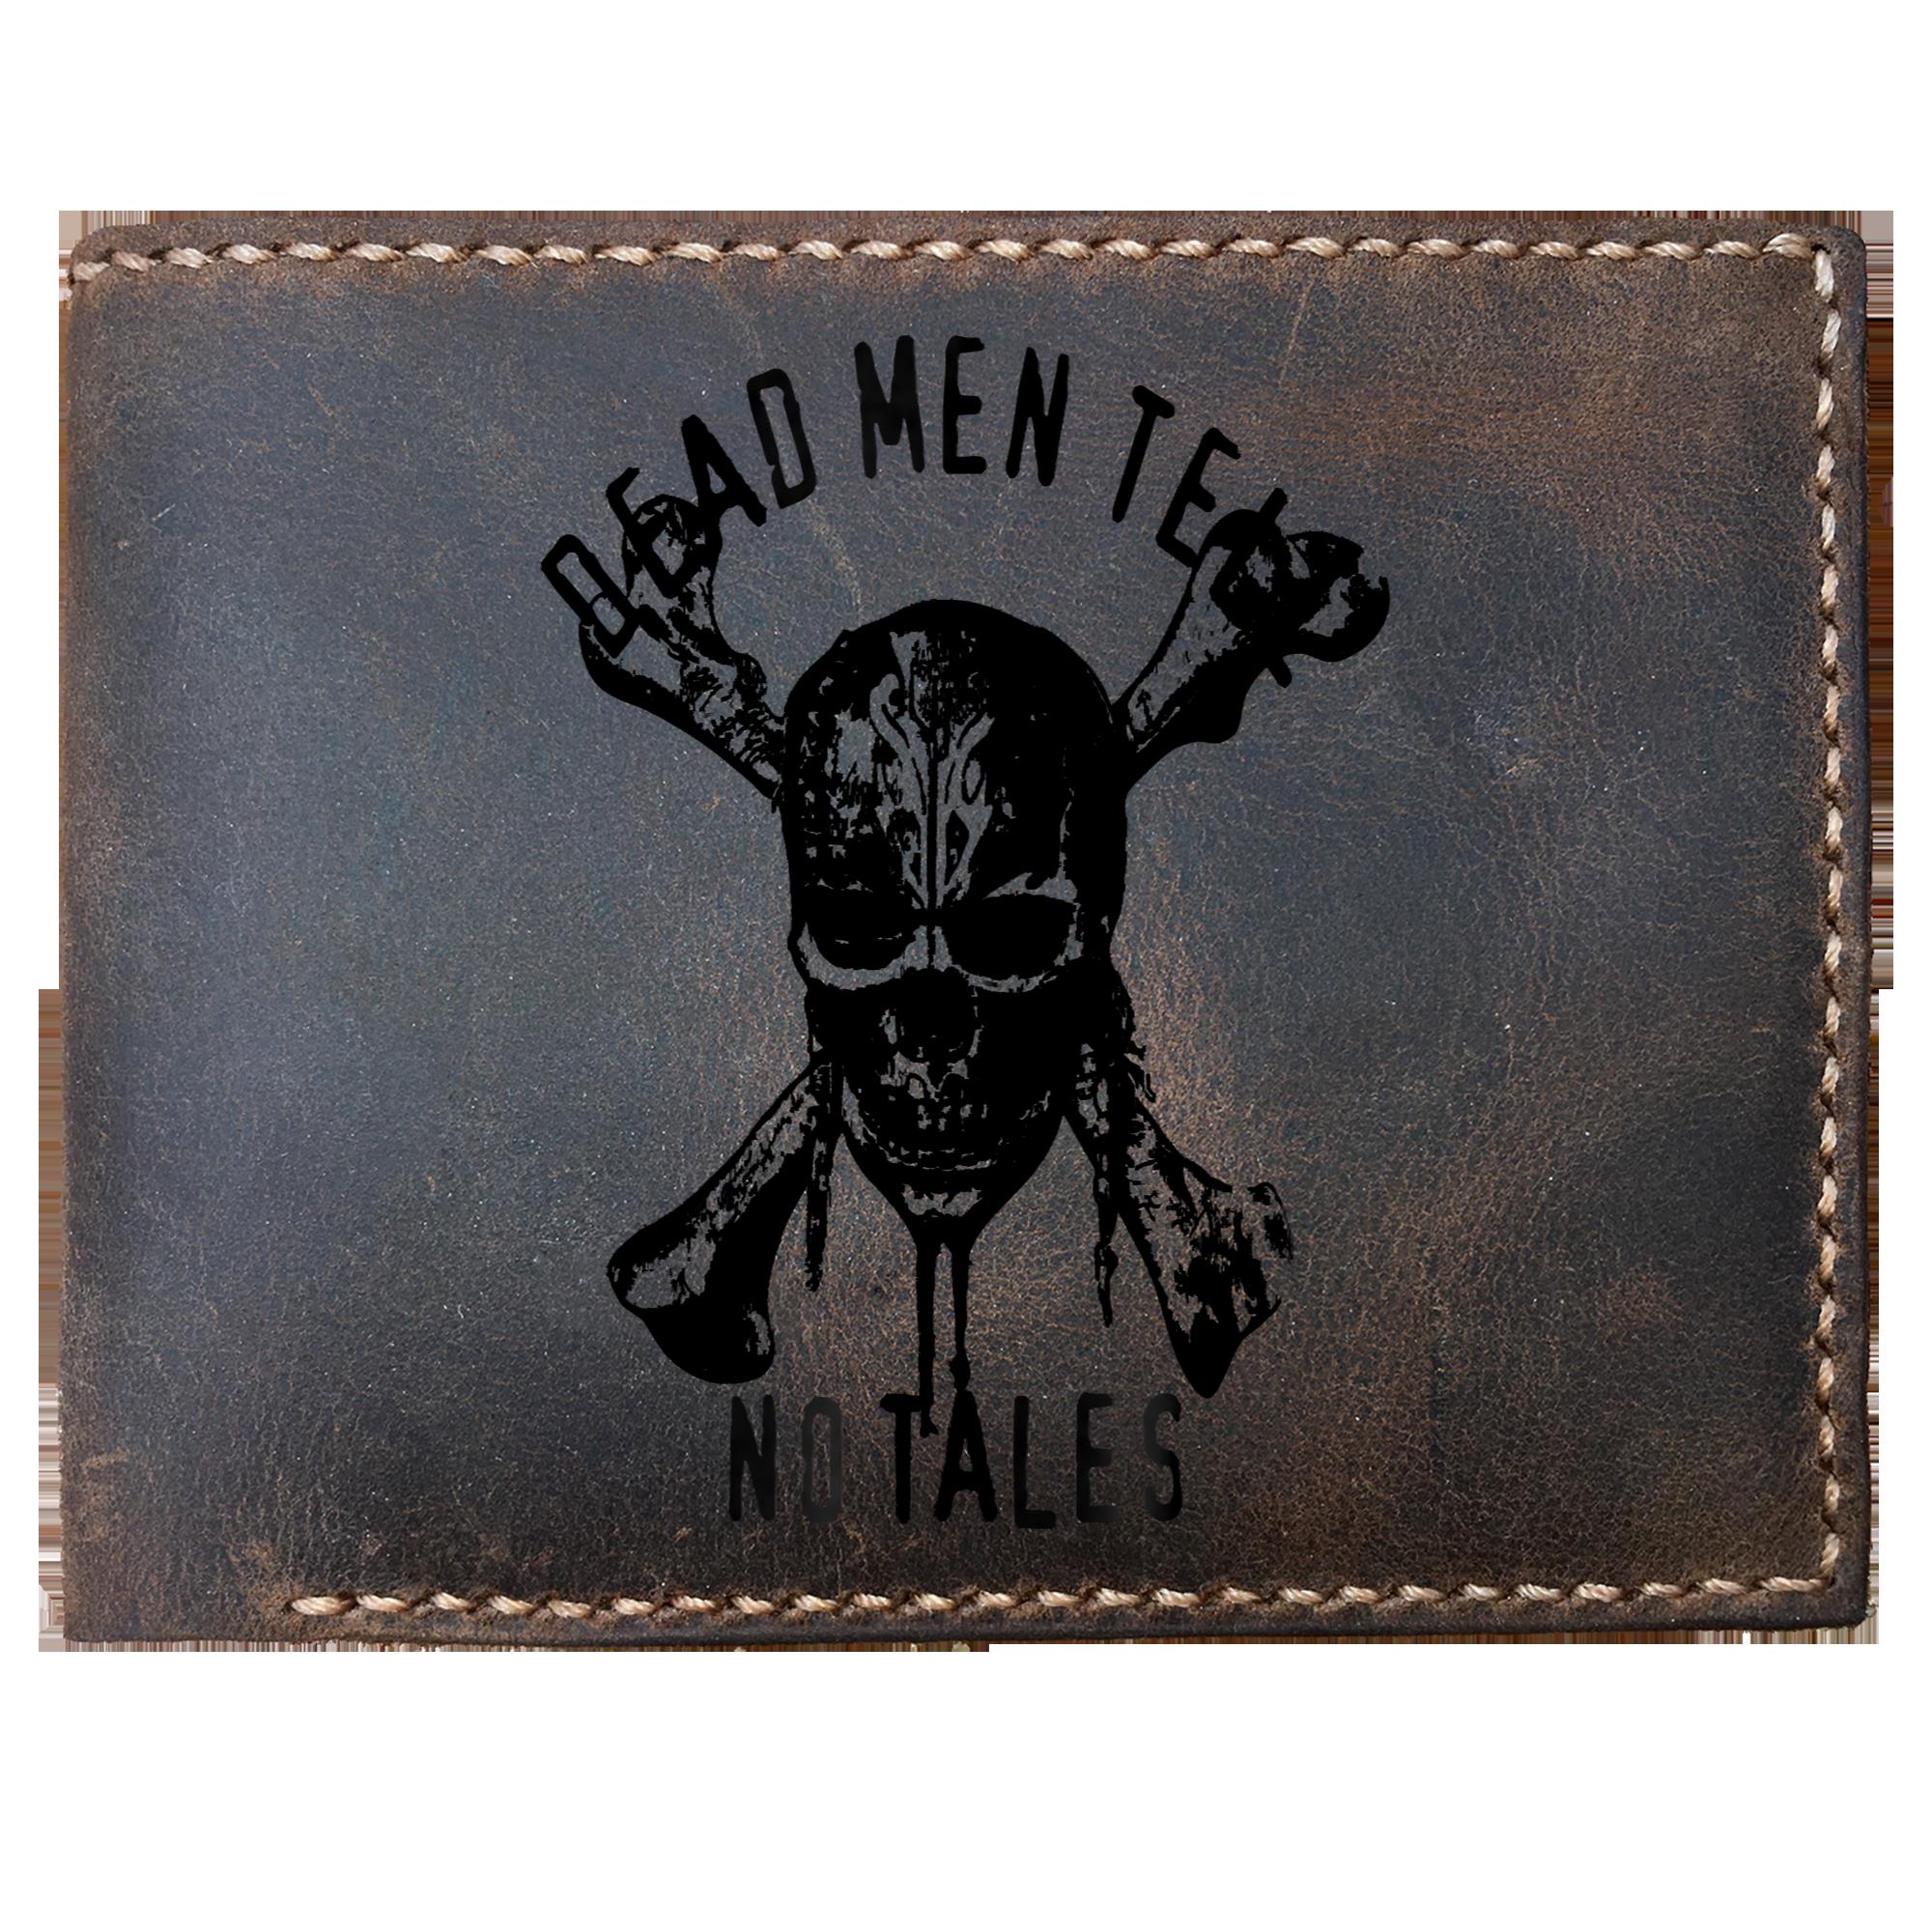 Skitongifts Funny Custom Laser Engraved Bifold Leather Wallet For Men, Dead Men Tell No Tales